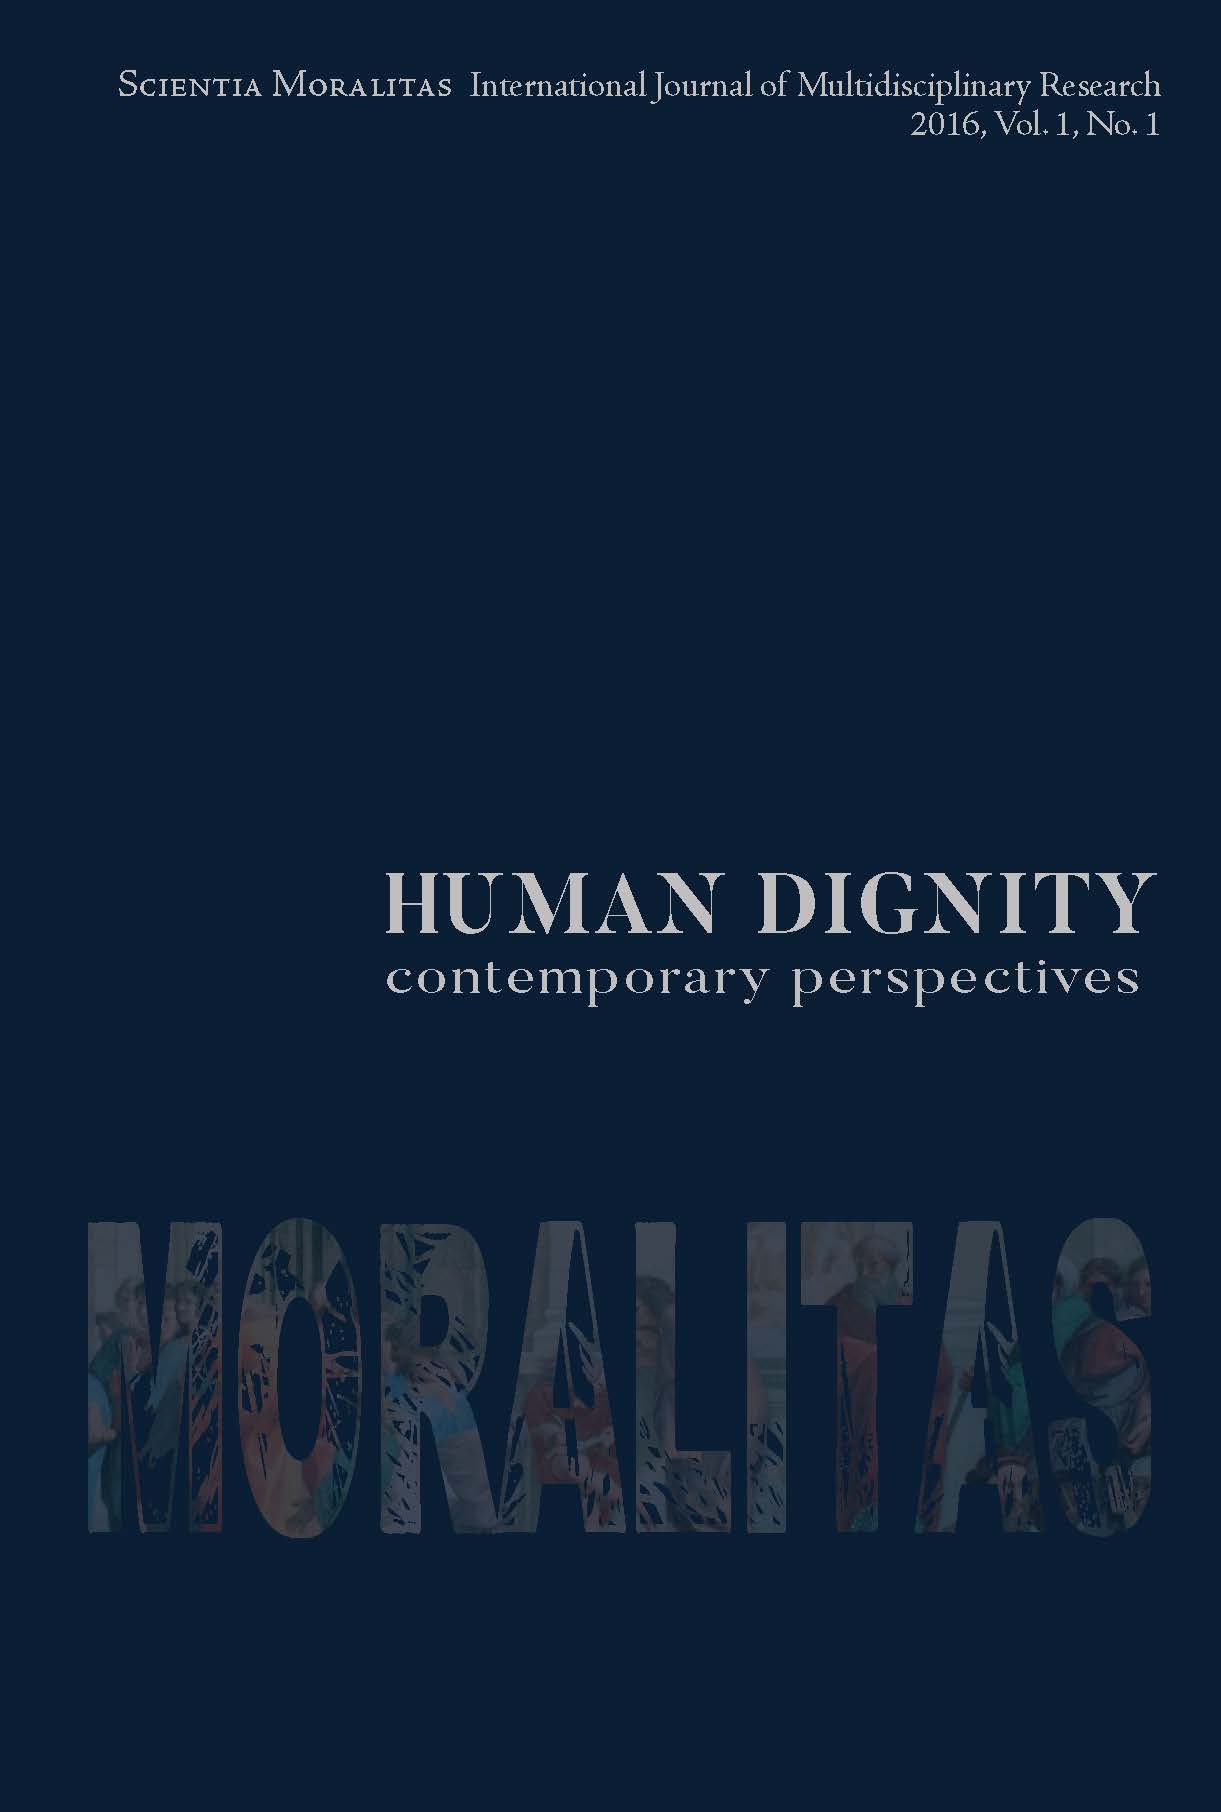 Digital Humanities Culture:
Enabler or Obstacle for the
Development of Human Dignity?